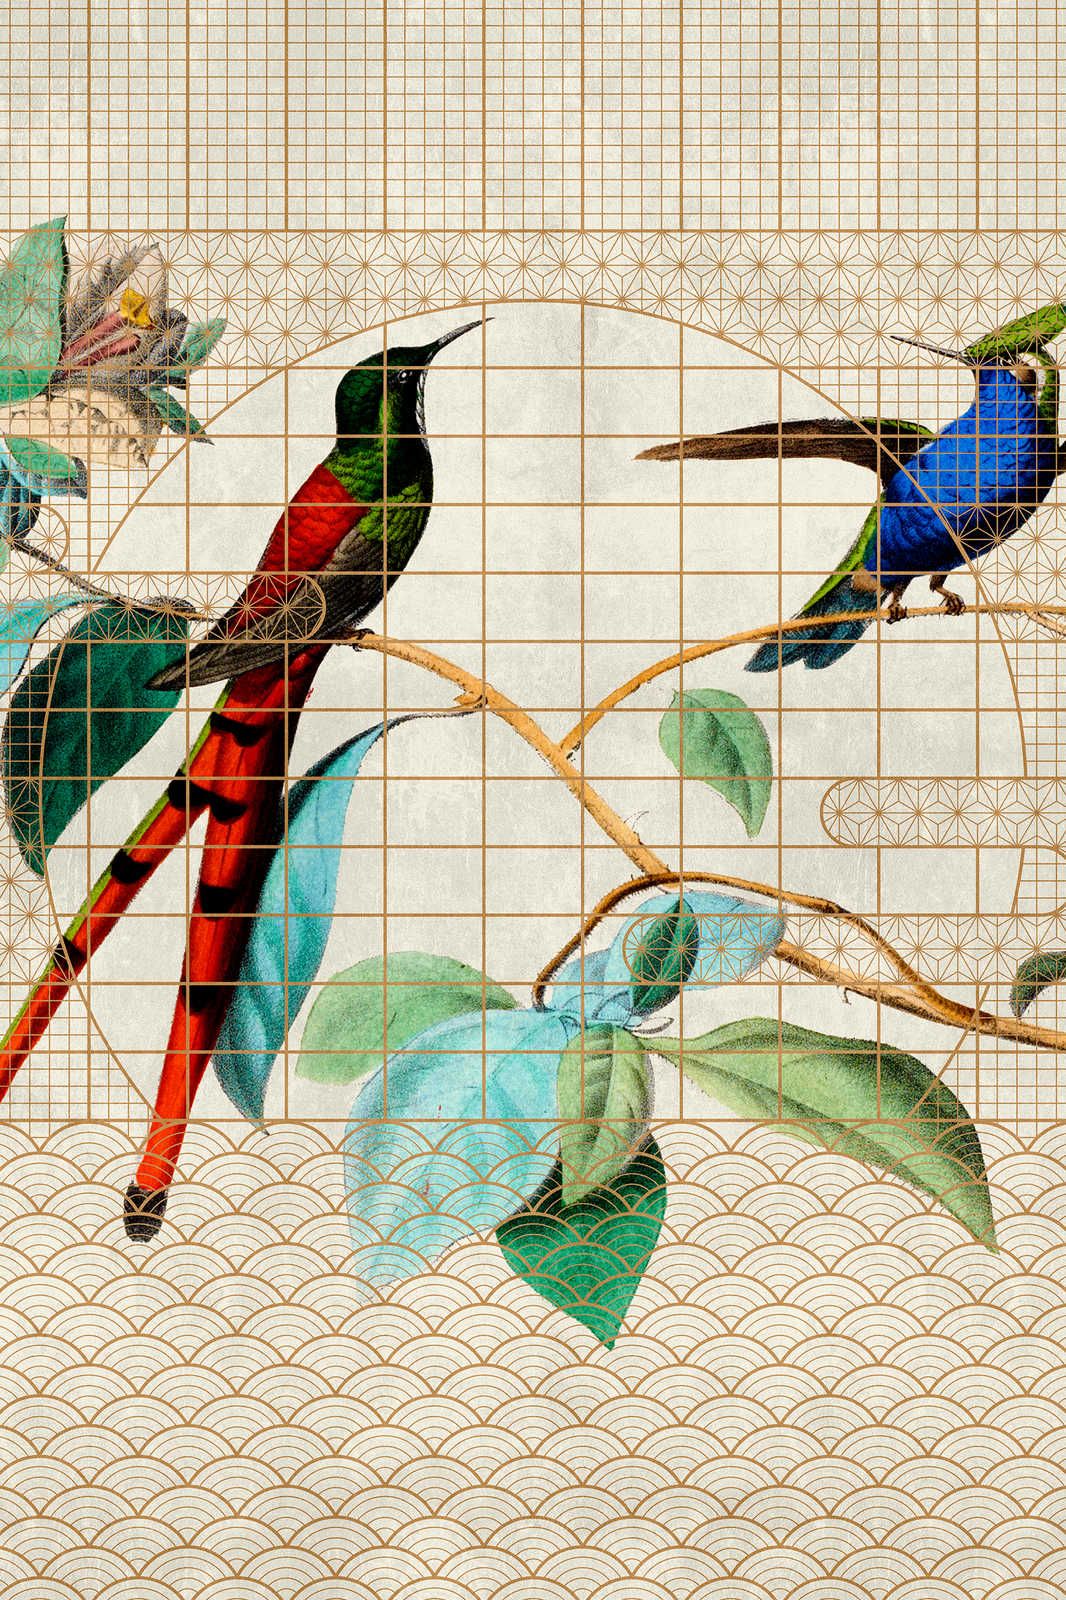             Aviary 2 - Birds Canvas painting Singing birds in a golden cage - 0.90 m x 0.60 m
        